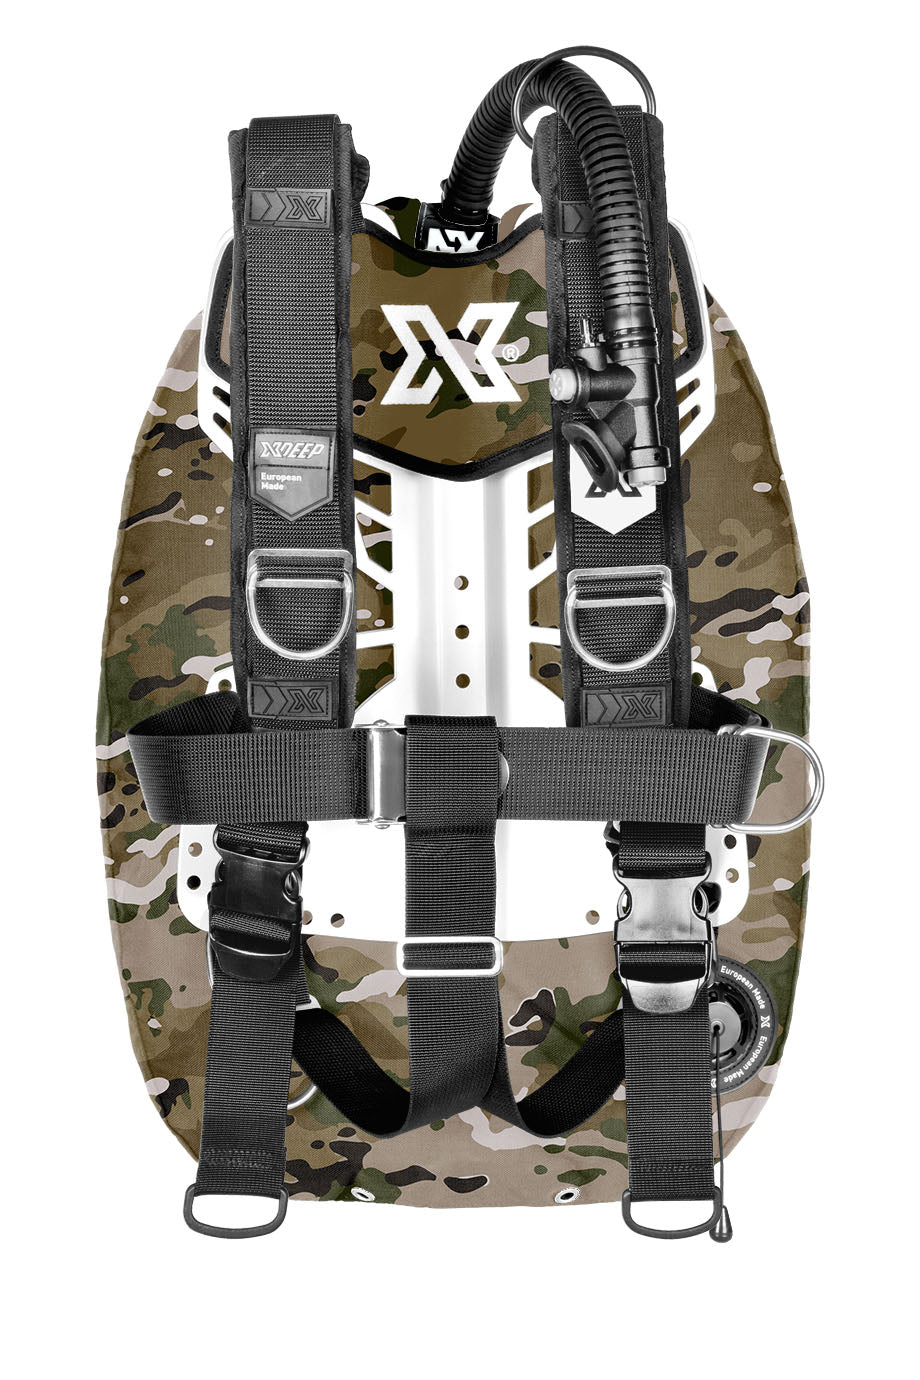 XDEEP XDEEP Zen Ultralight Wing System Deluxe / Small / Camo - Oyster Diving